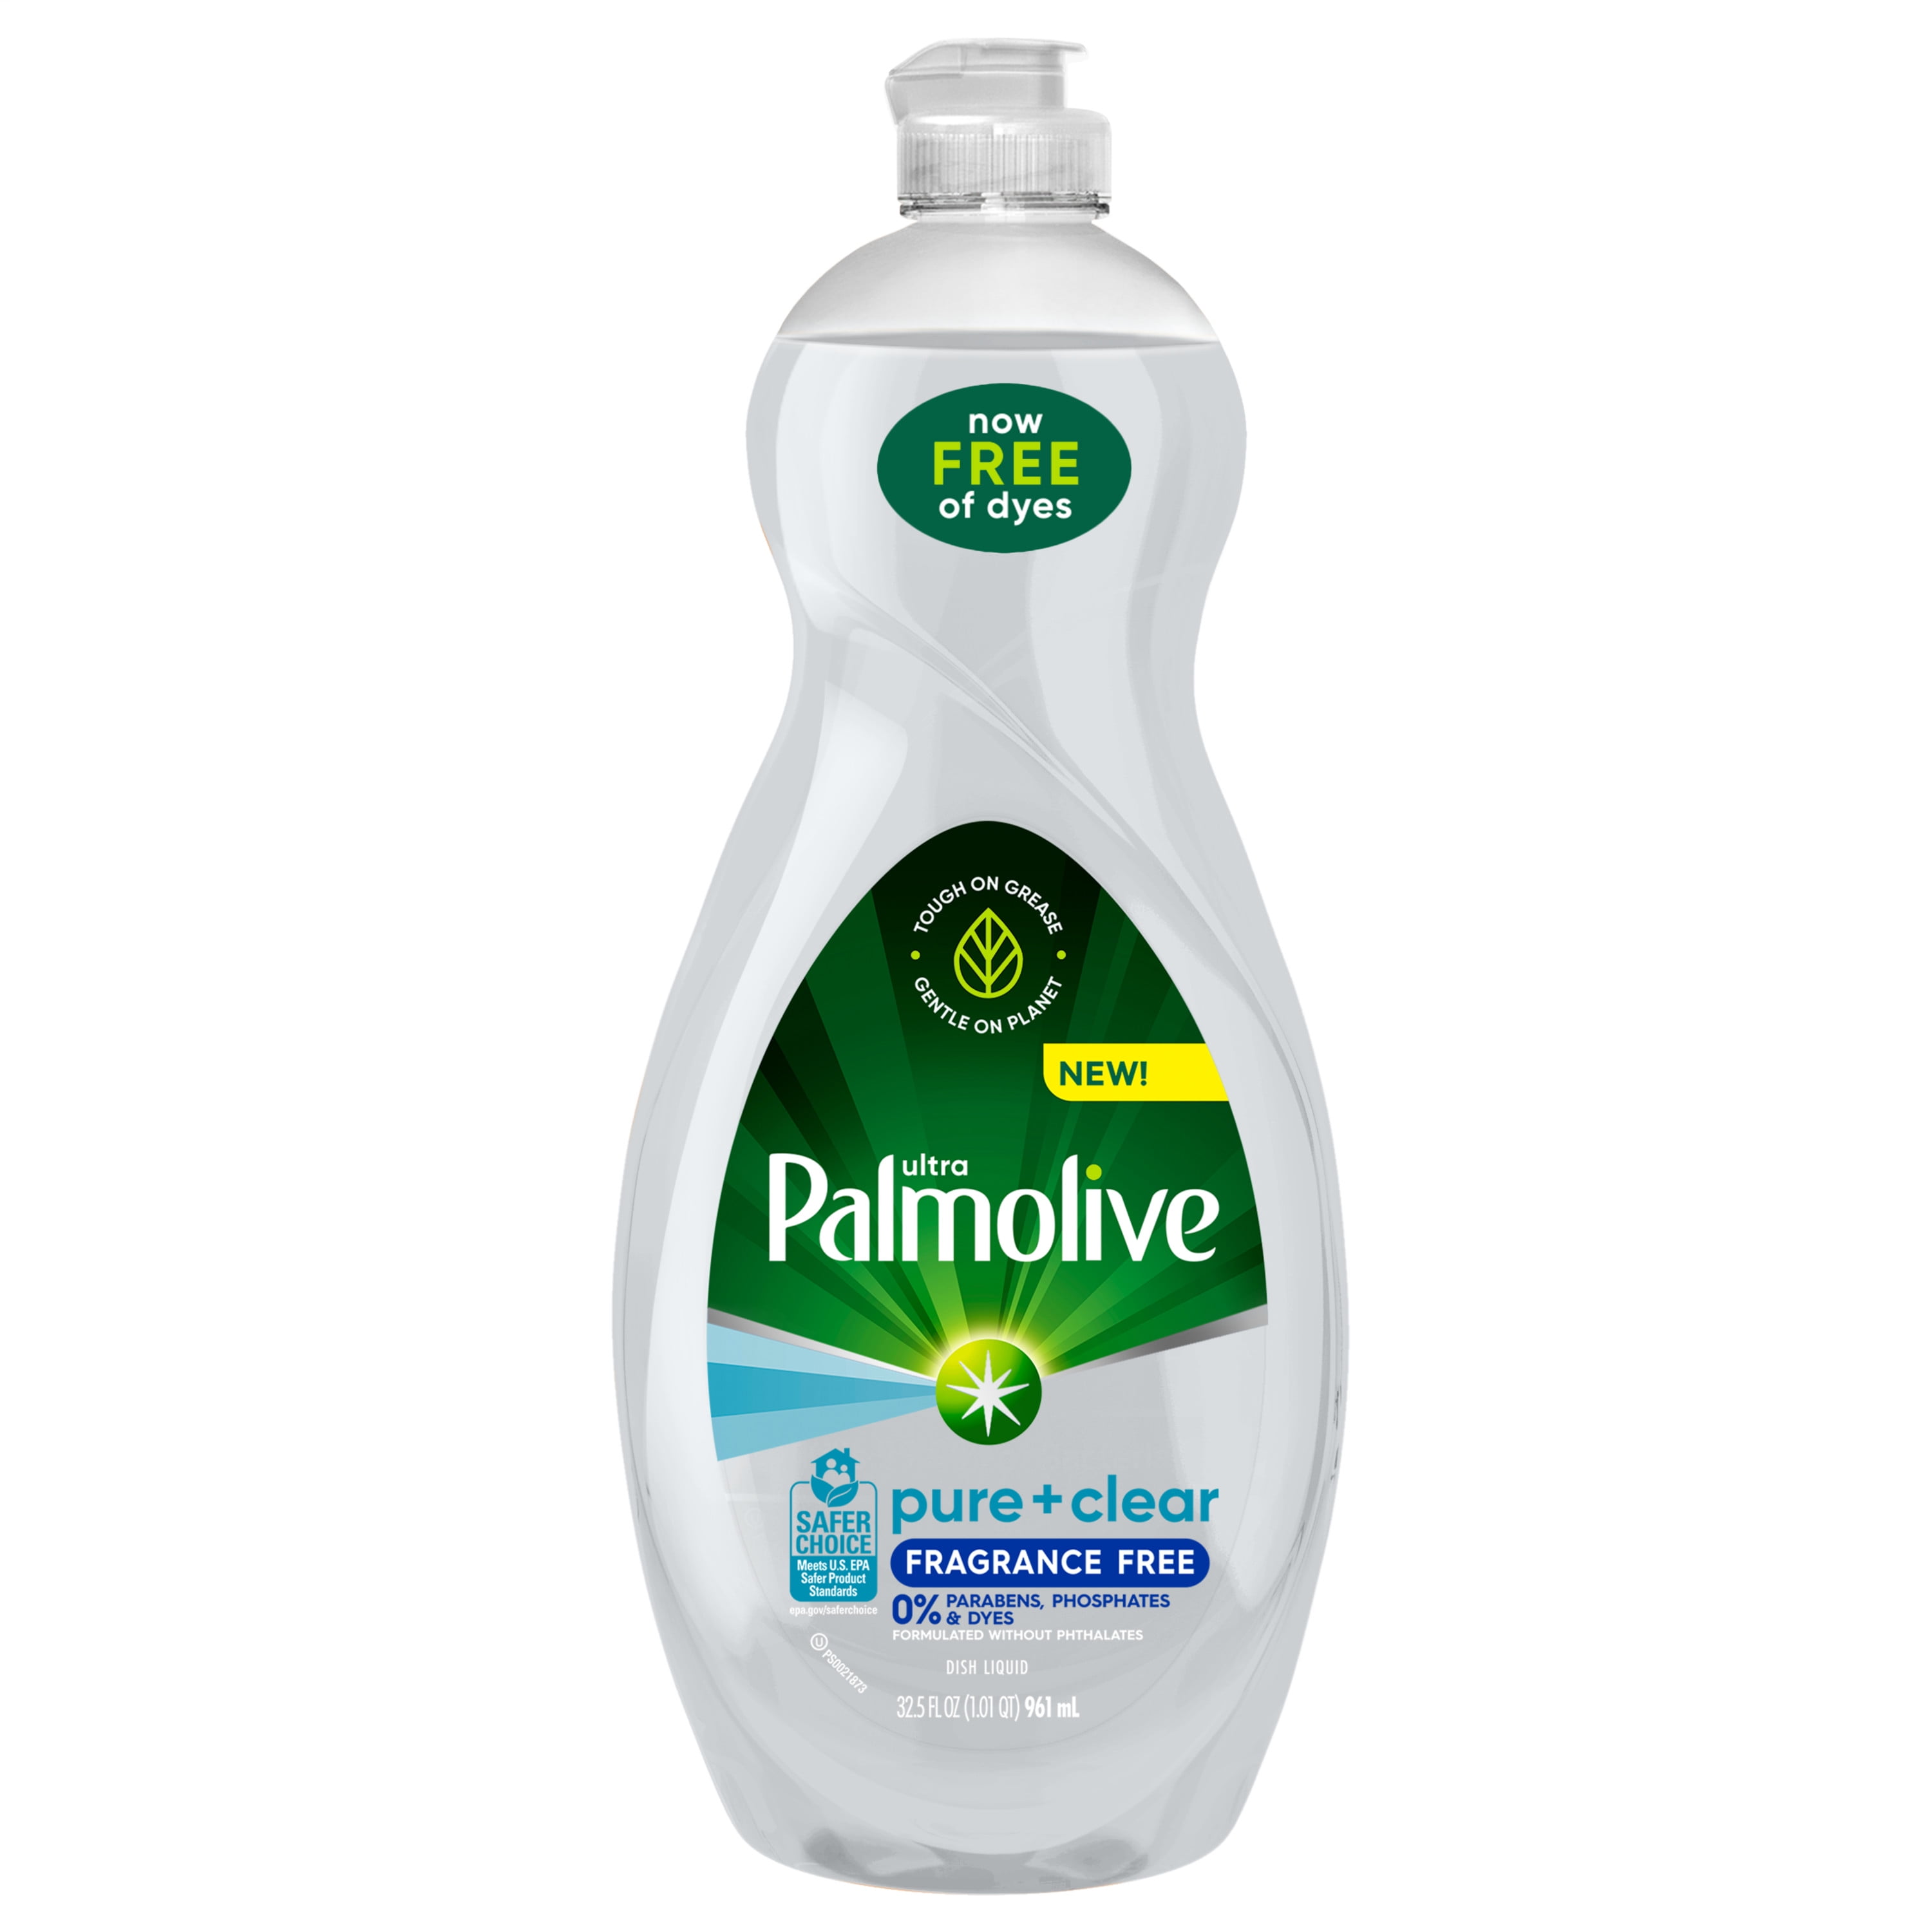 Palmolive Dishwashing Liquid Dish Soap, Unscented Scent, 32.5 Fluid Ounce